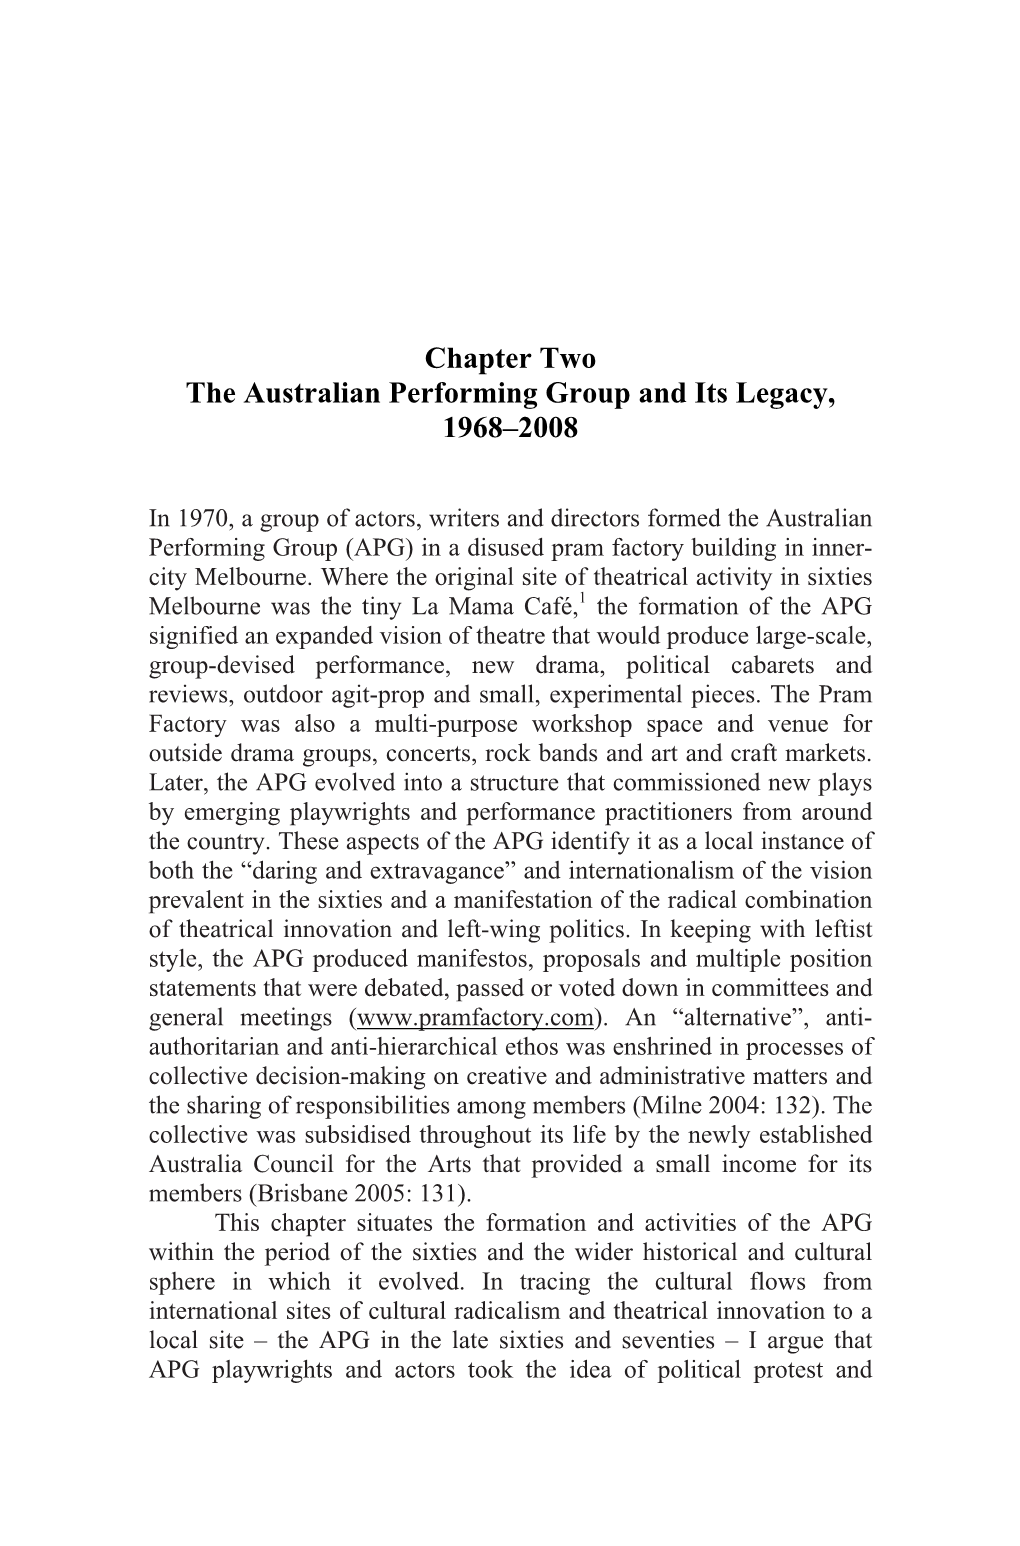 Chapter Two the Australian Performing Group and Its Legacy, 1968–2008